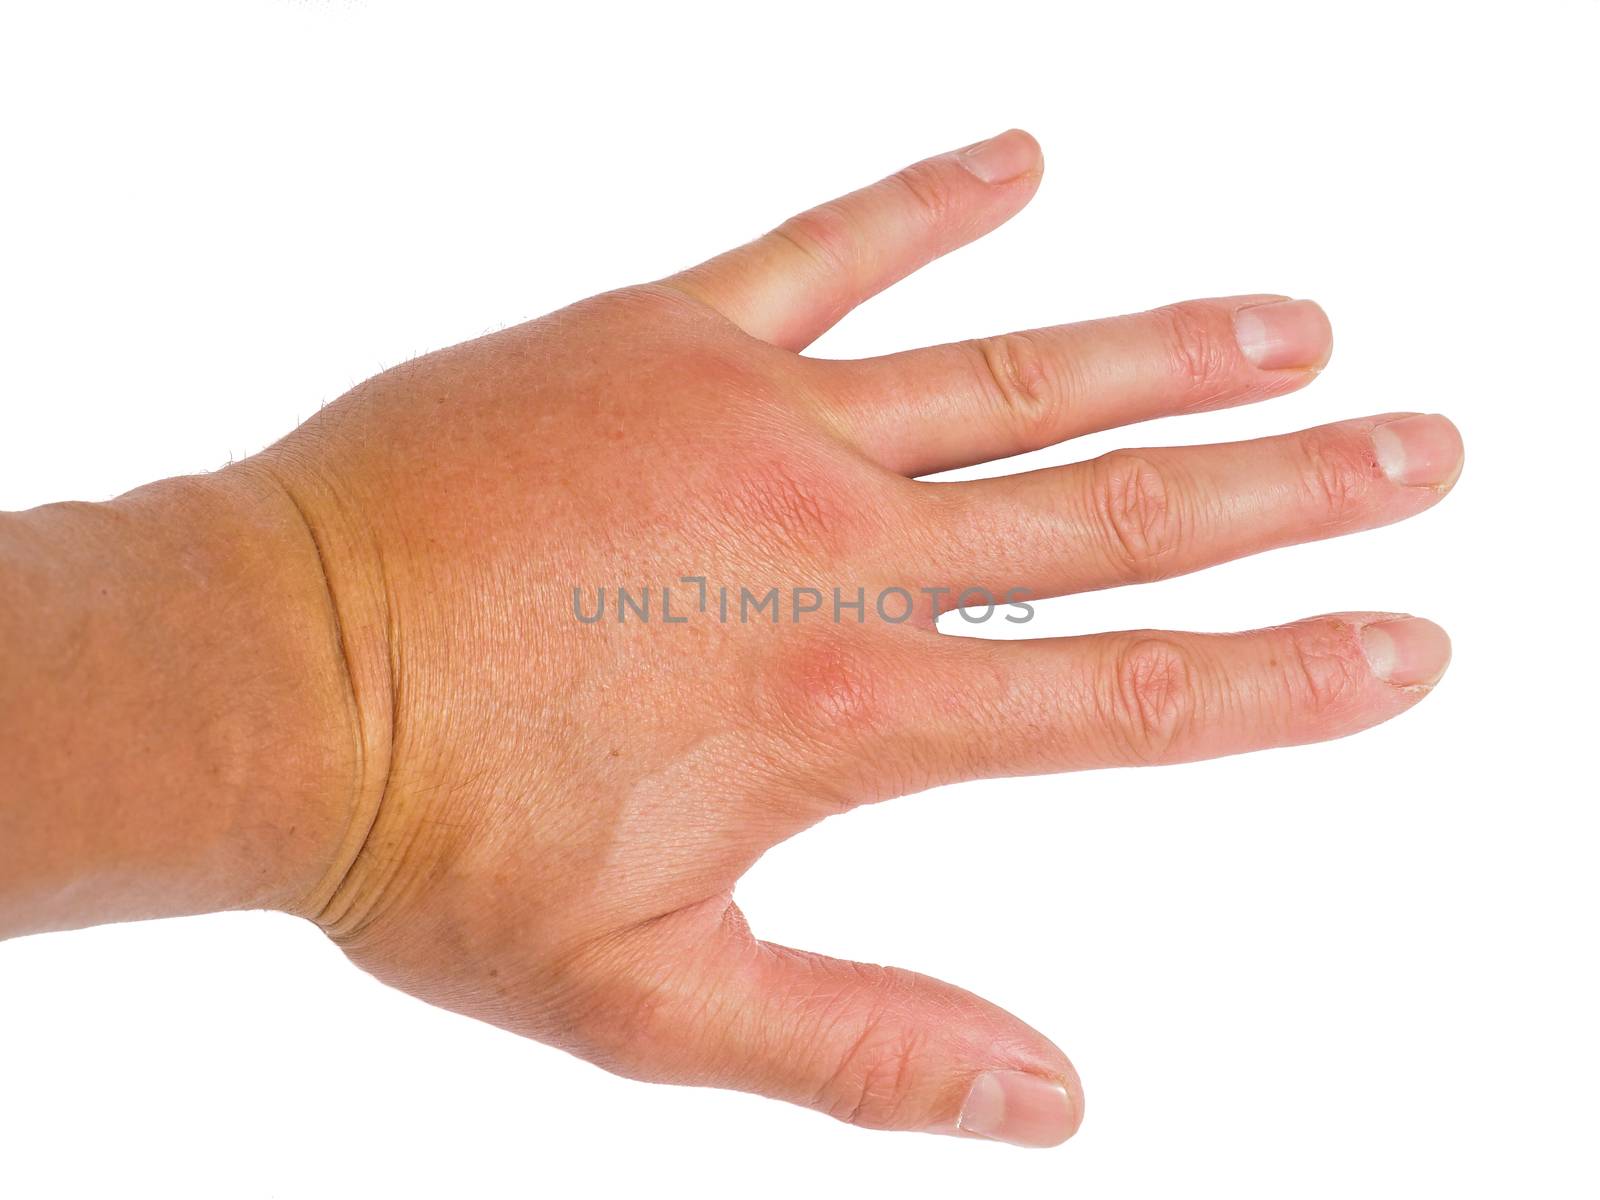 Male person showing swollen knuckles on left hand isolated on white